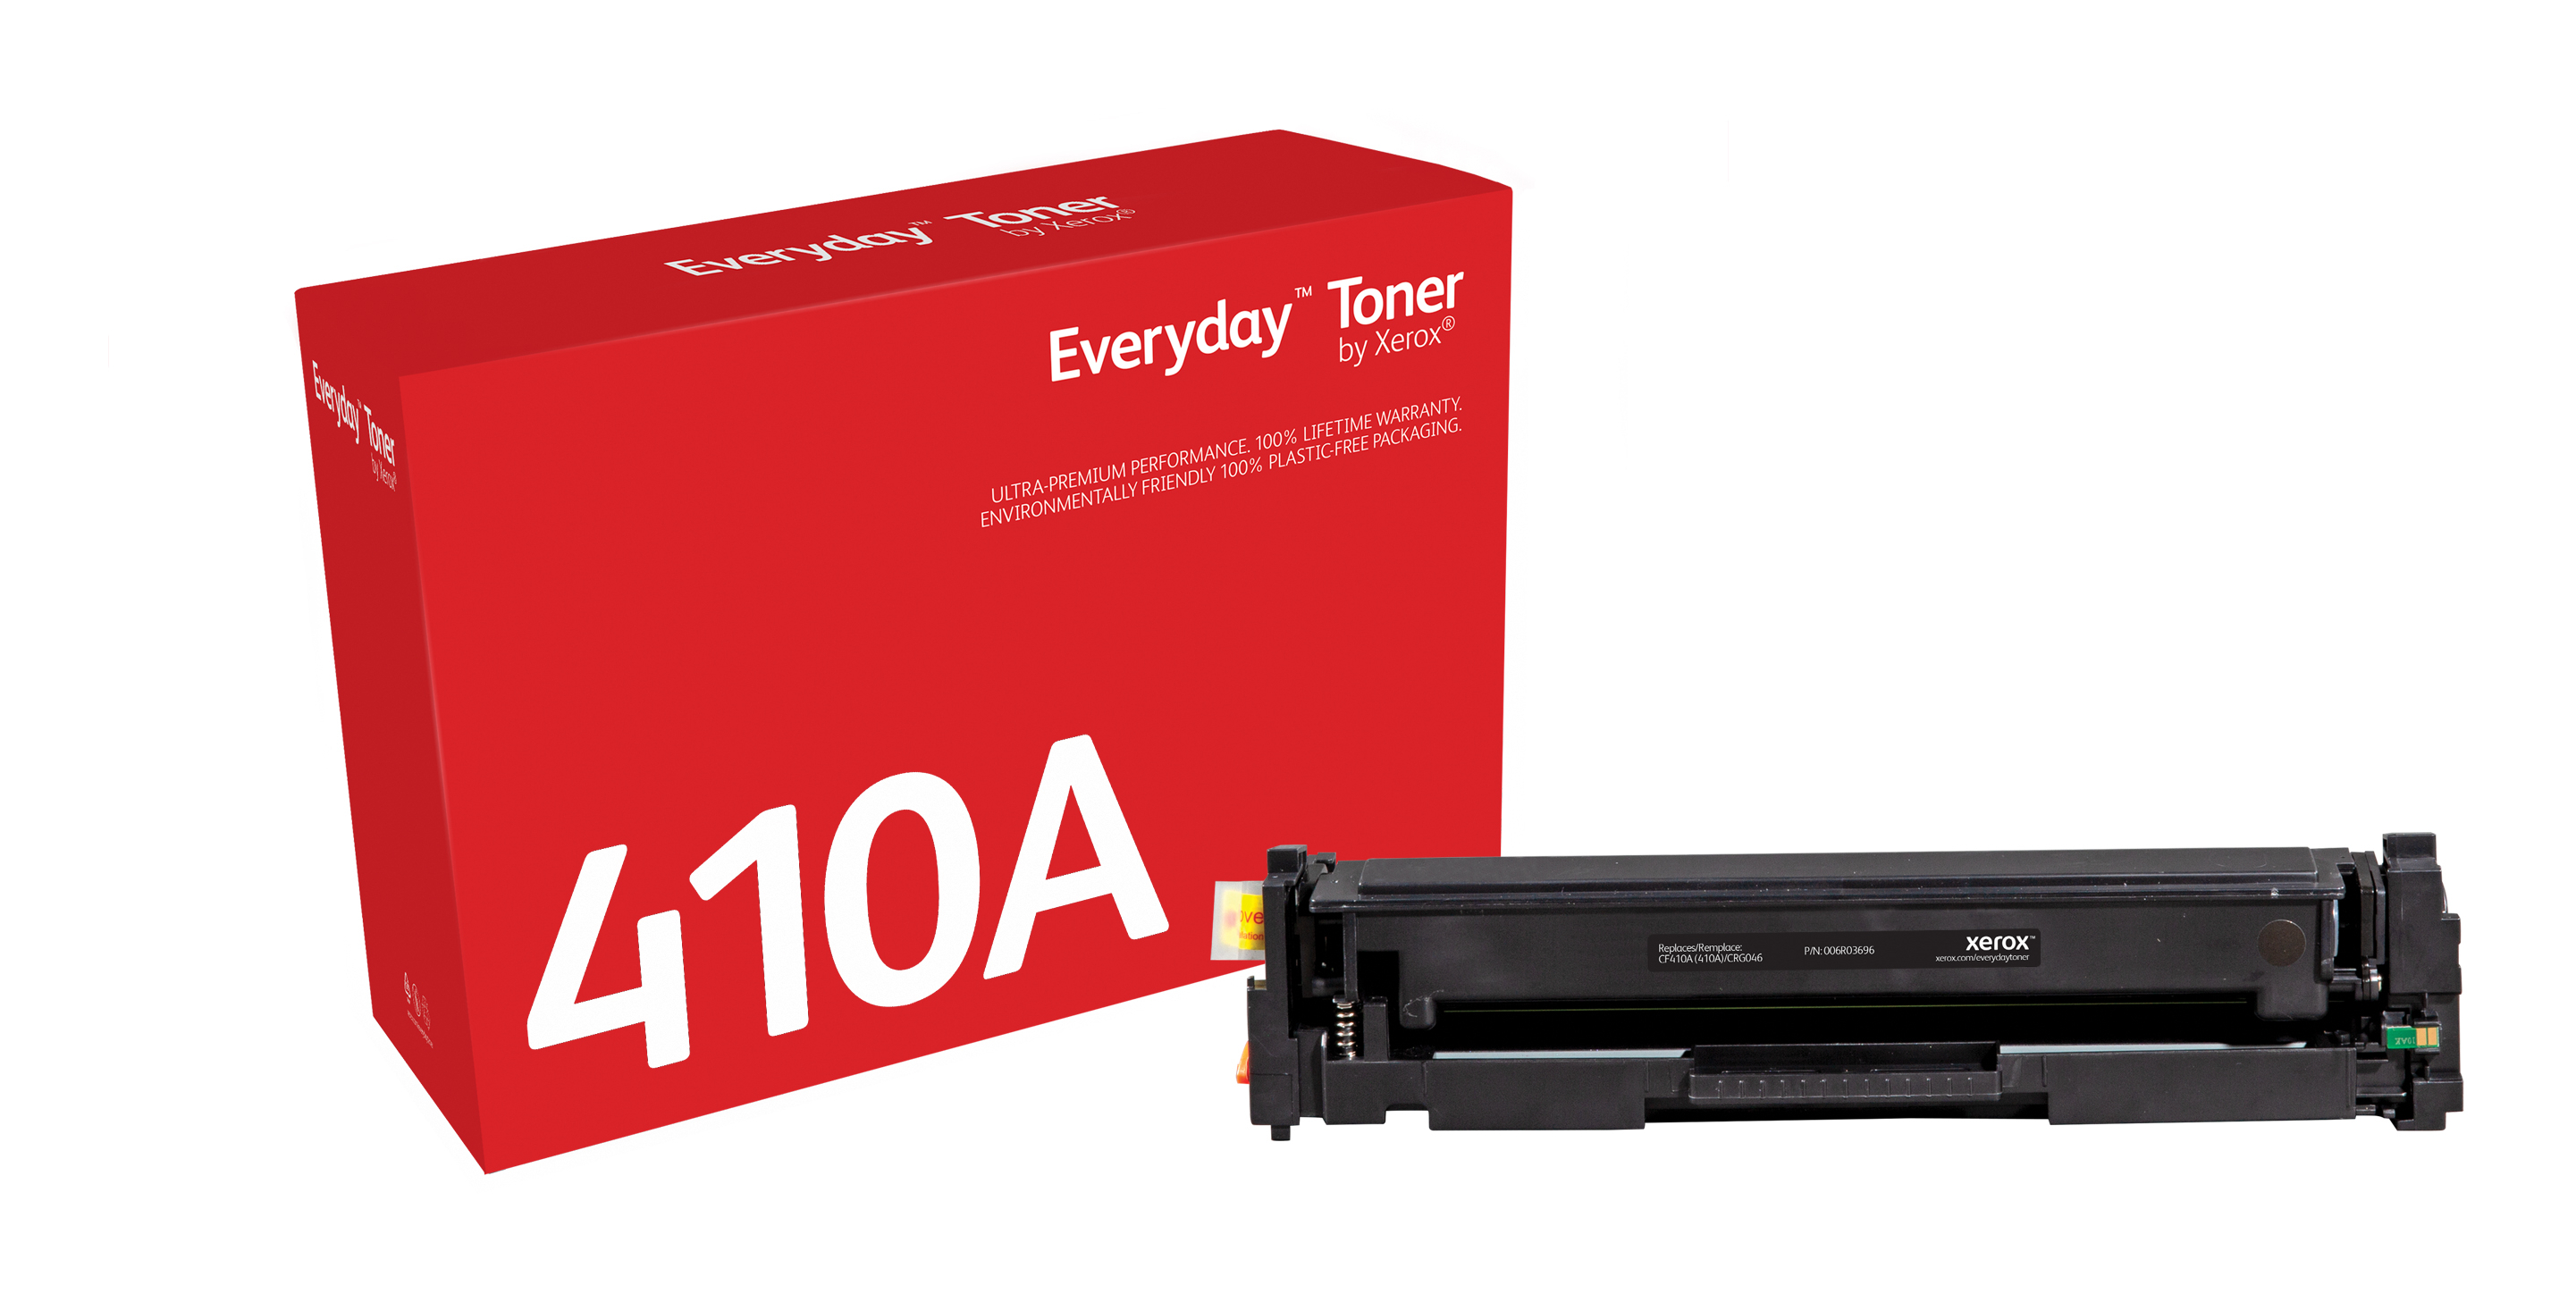 Everyday Black Toner compatible with HP 201A (CF410A), Standard Yield  006R03696 by Xerox